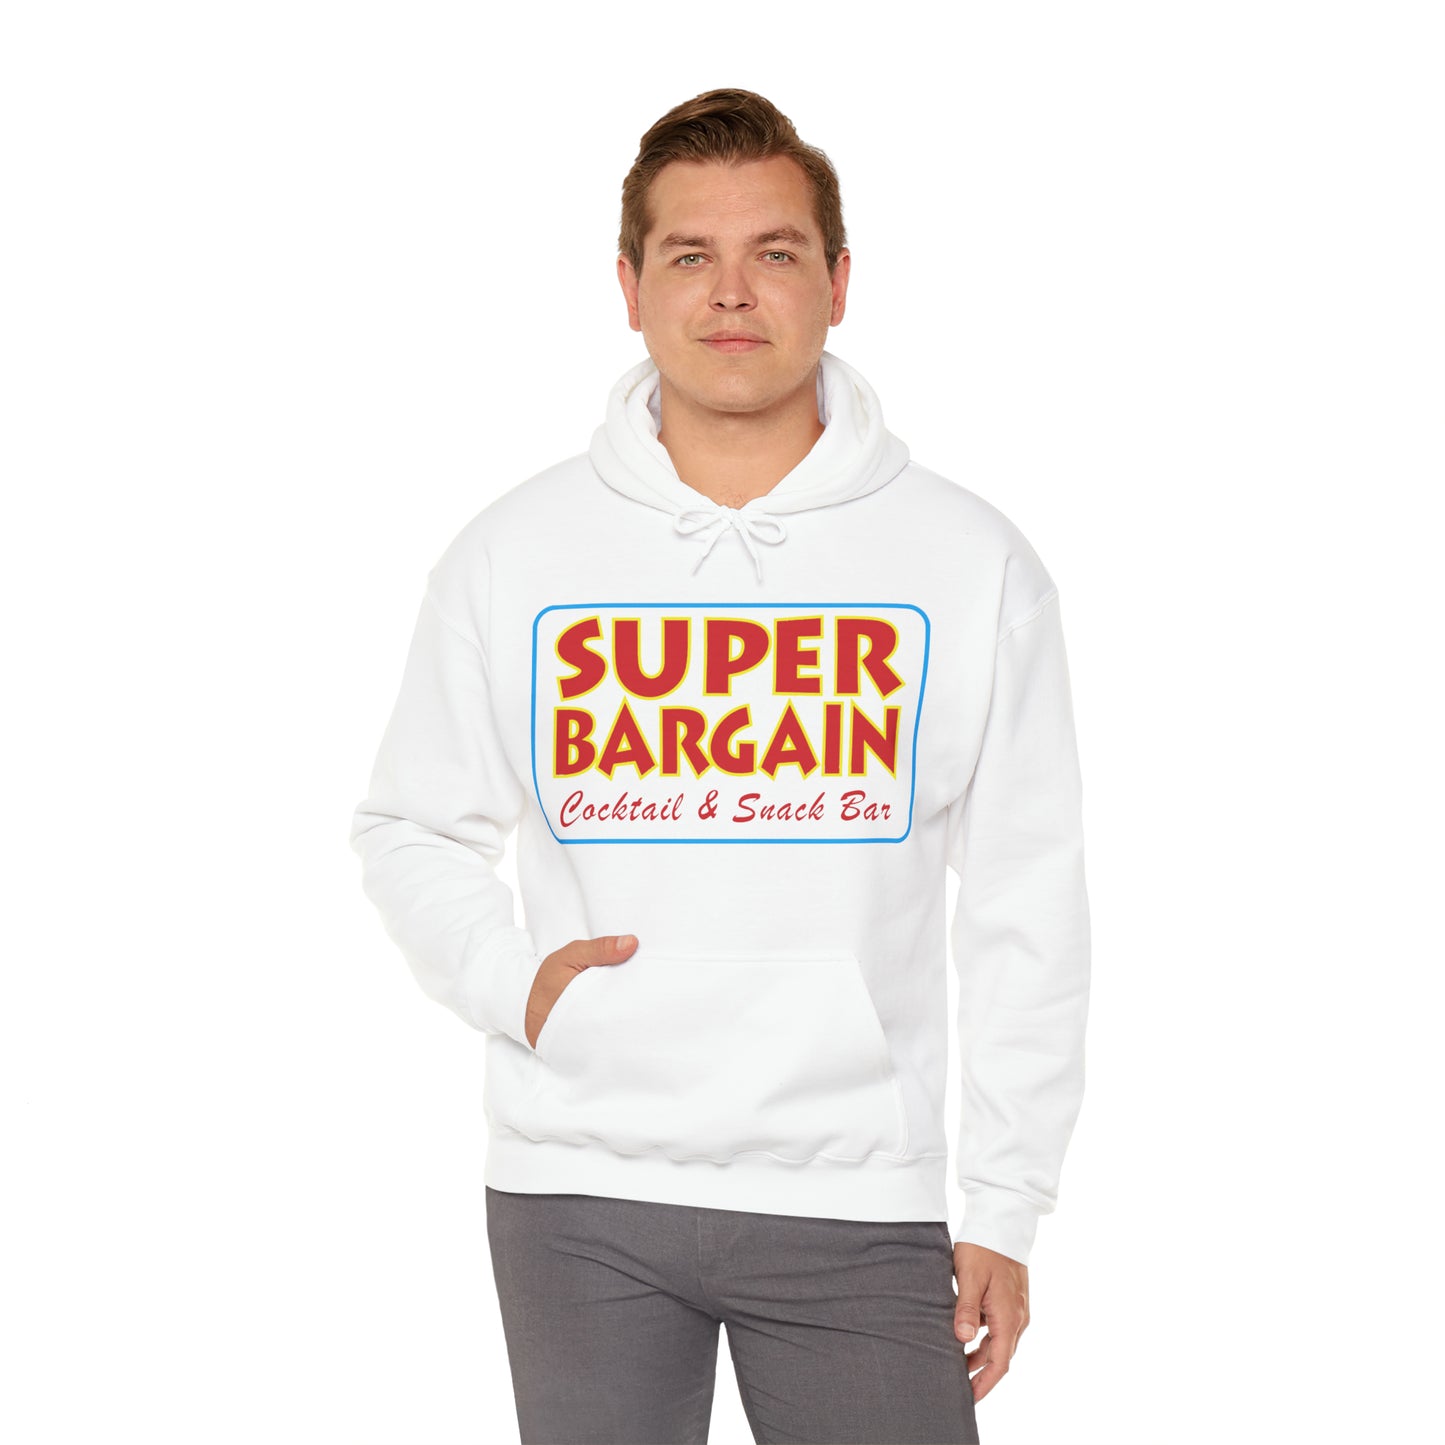 A man wearing a white Unisex Heavy Blend™ Hooded Sweatshirt by Printify with "SUPER BARGAIN Cocktail & Snack Bar, Cabbagetown" printed on the front, standing against a white background.